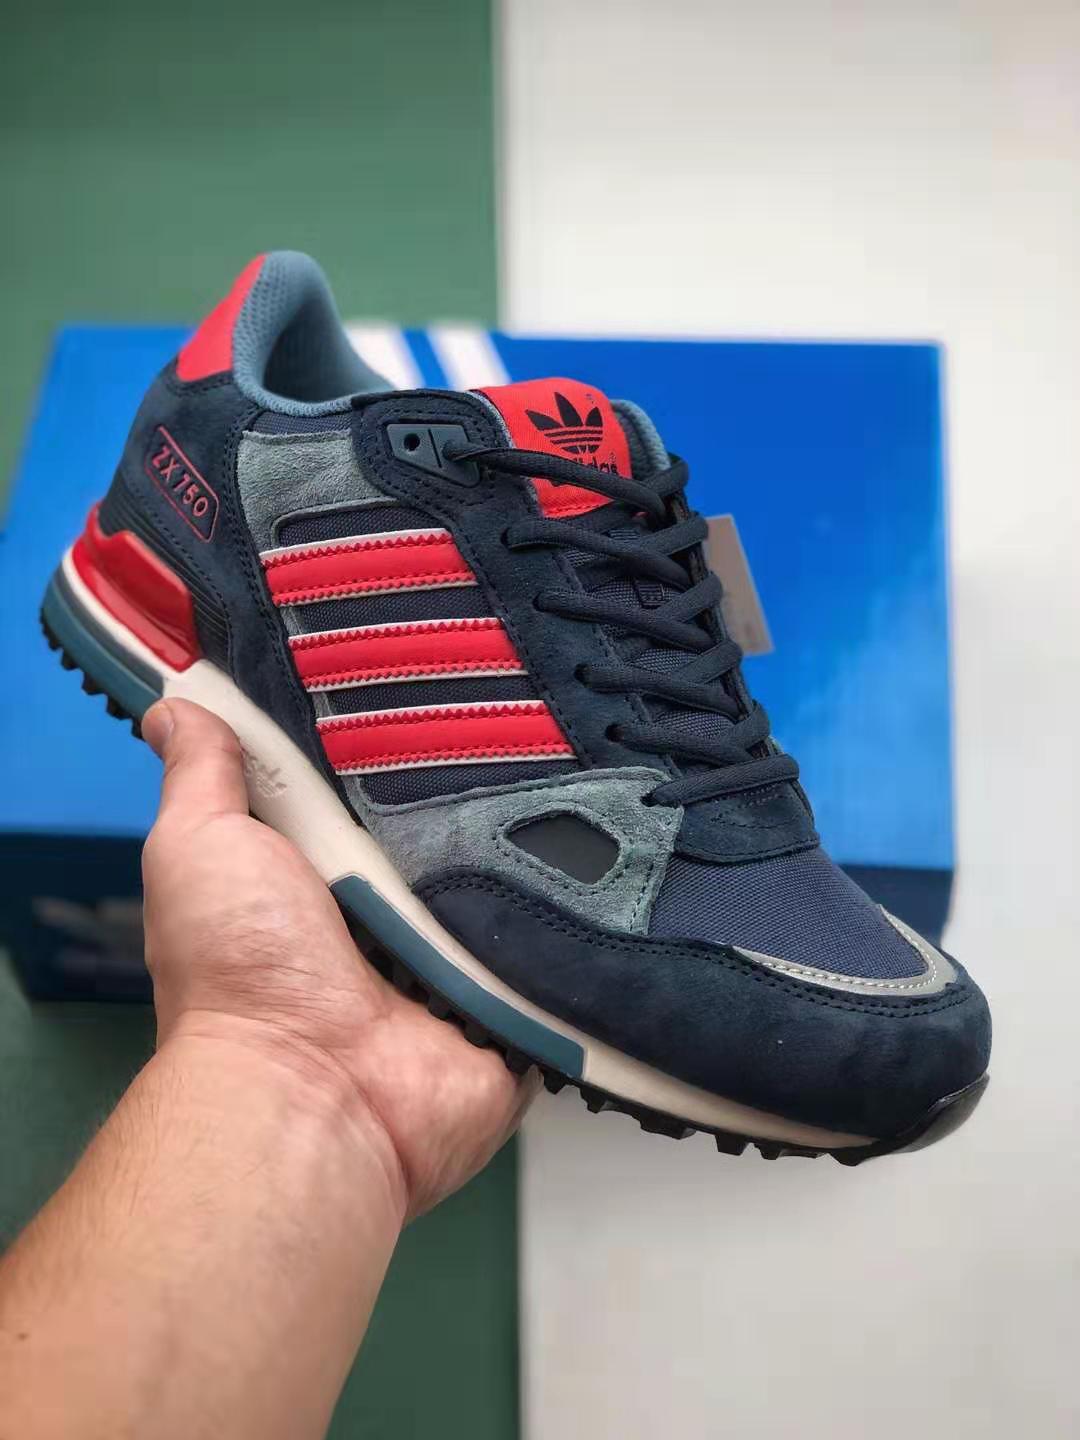 Adidas ZX 750 Navy Black Red M18260 | Classic Style & Premium Quality